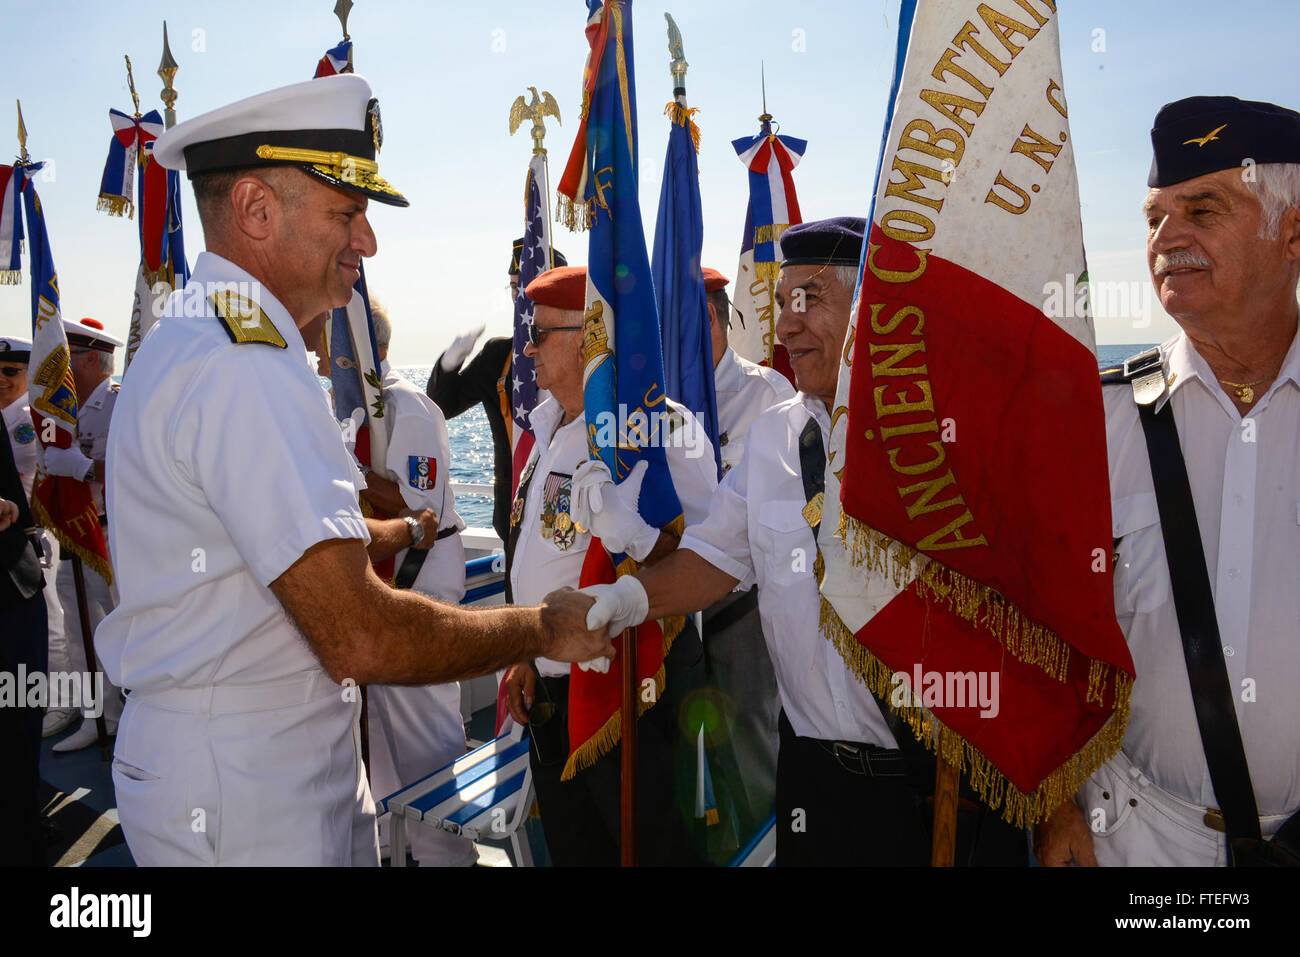 140815-N-UE250-132 GULF OF NAPOULE (Aug. 15, 2014) - Rear Adm. Robert Burke, deputy commander, U.S. 6th Fleet, greats members of the French Veterans Organiztion during a remembrance ceremony at sea. The event was held in commemoration of the 70th Anniversary of Operation Dragoon, which led to the liberation of Southern France by Allied Forces during World War II. (U.S. Navy photo by Mass Communication Specialist 2nd Class Corey Hensley) Stock Photo